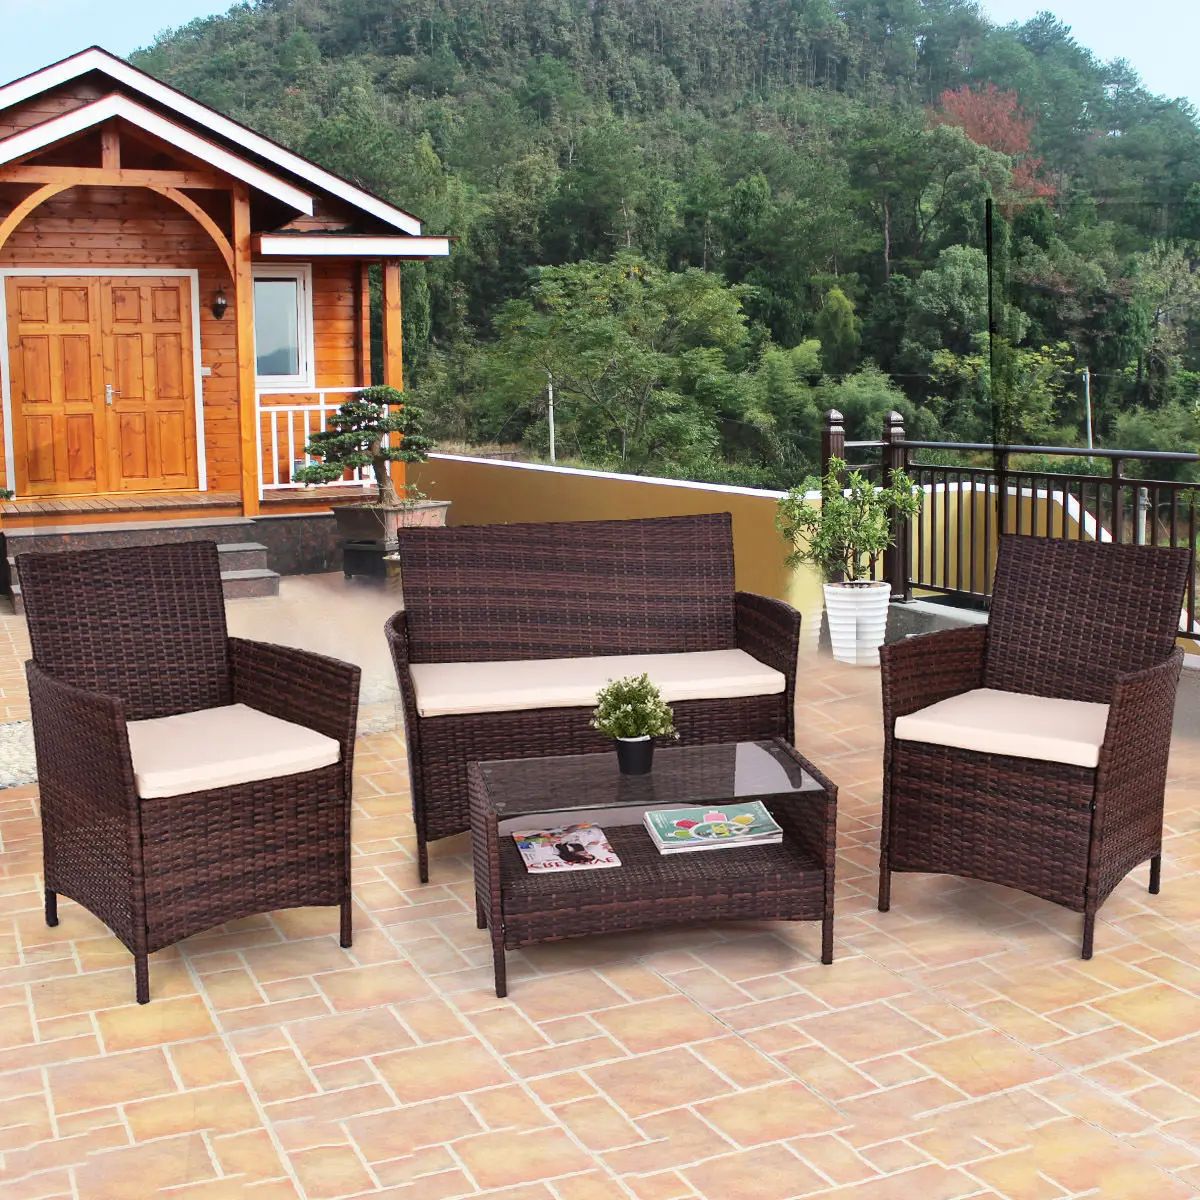 Giantex 4pcs Outdoor Patio Pe Rattan Wicker Coffee Table Shelf Modern Intended For 4pcs Rattan Patio Coffee Tables (View 5 of 20)